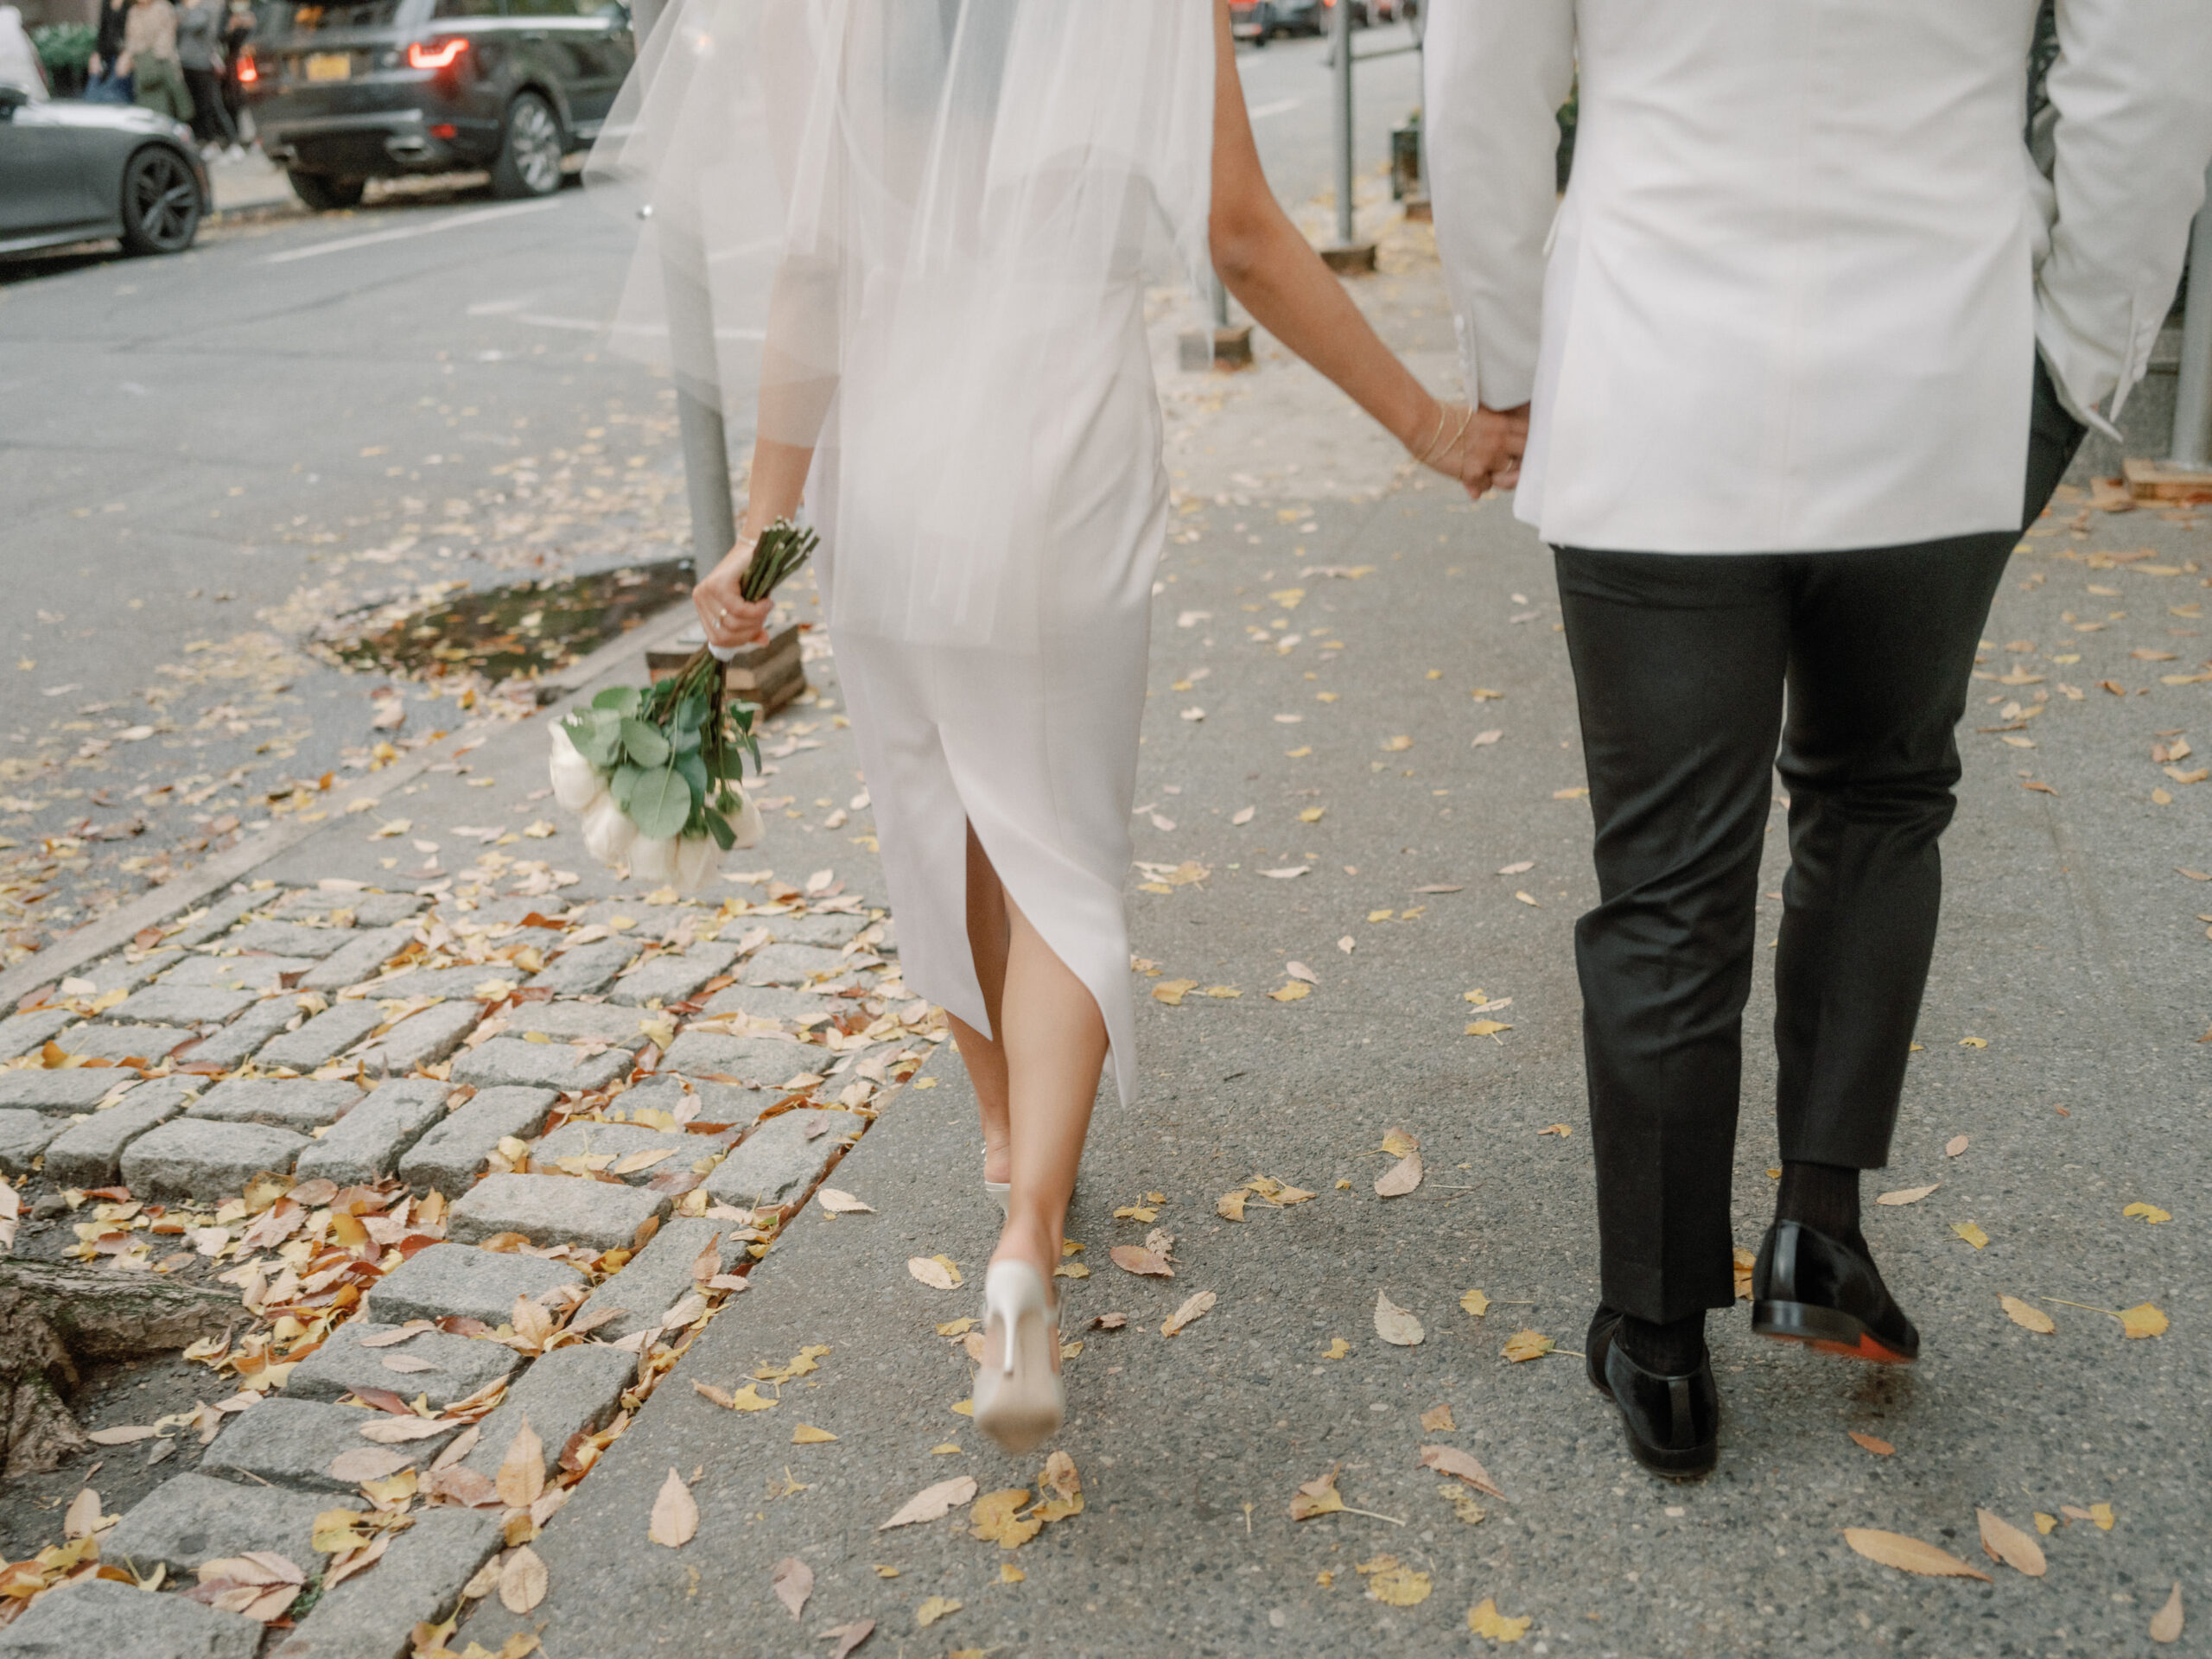 The newlyweds are walking on the streets of New York City. Timeless Wedding Photography image by Jenny Fu Studio